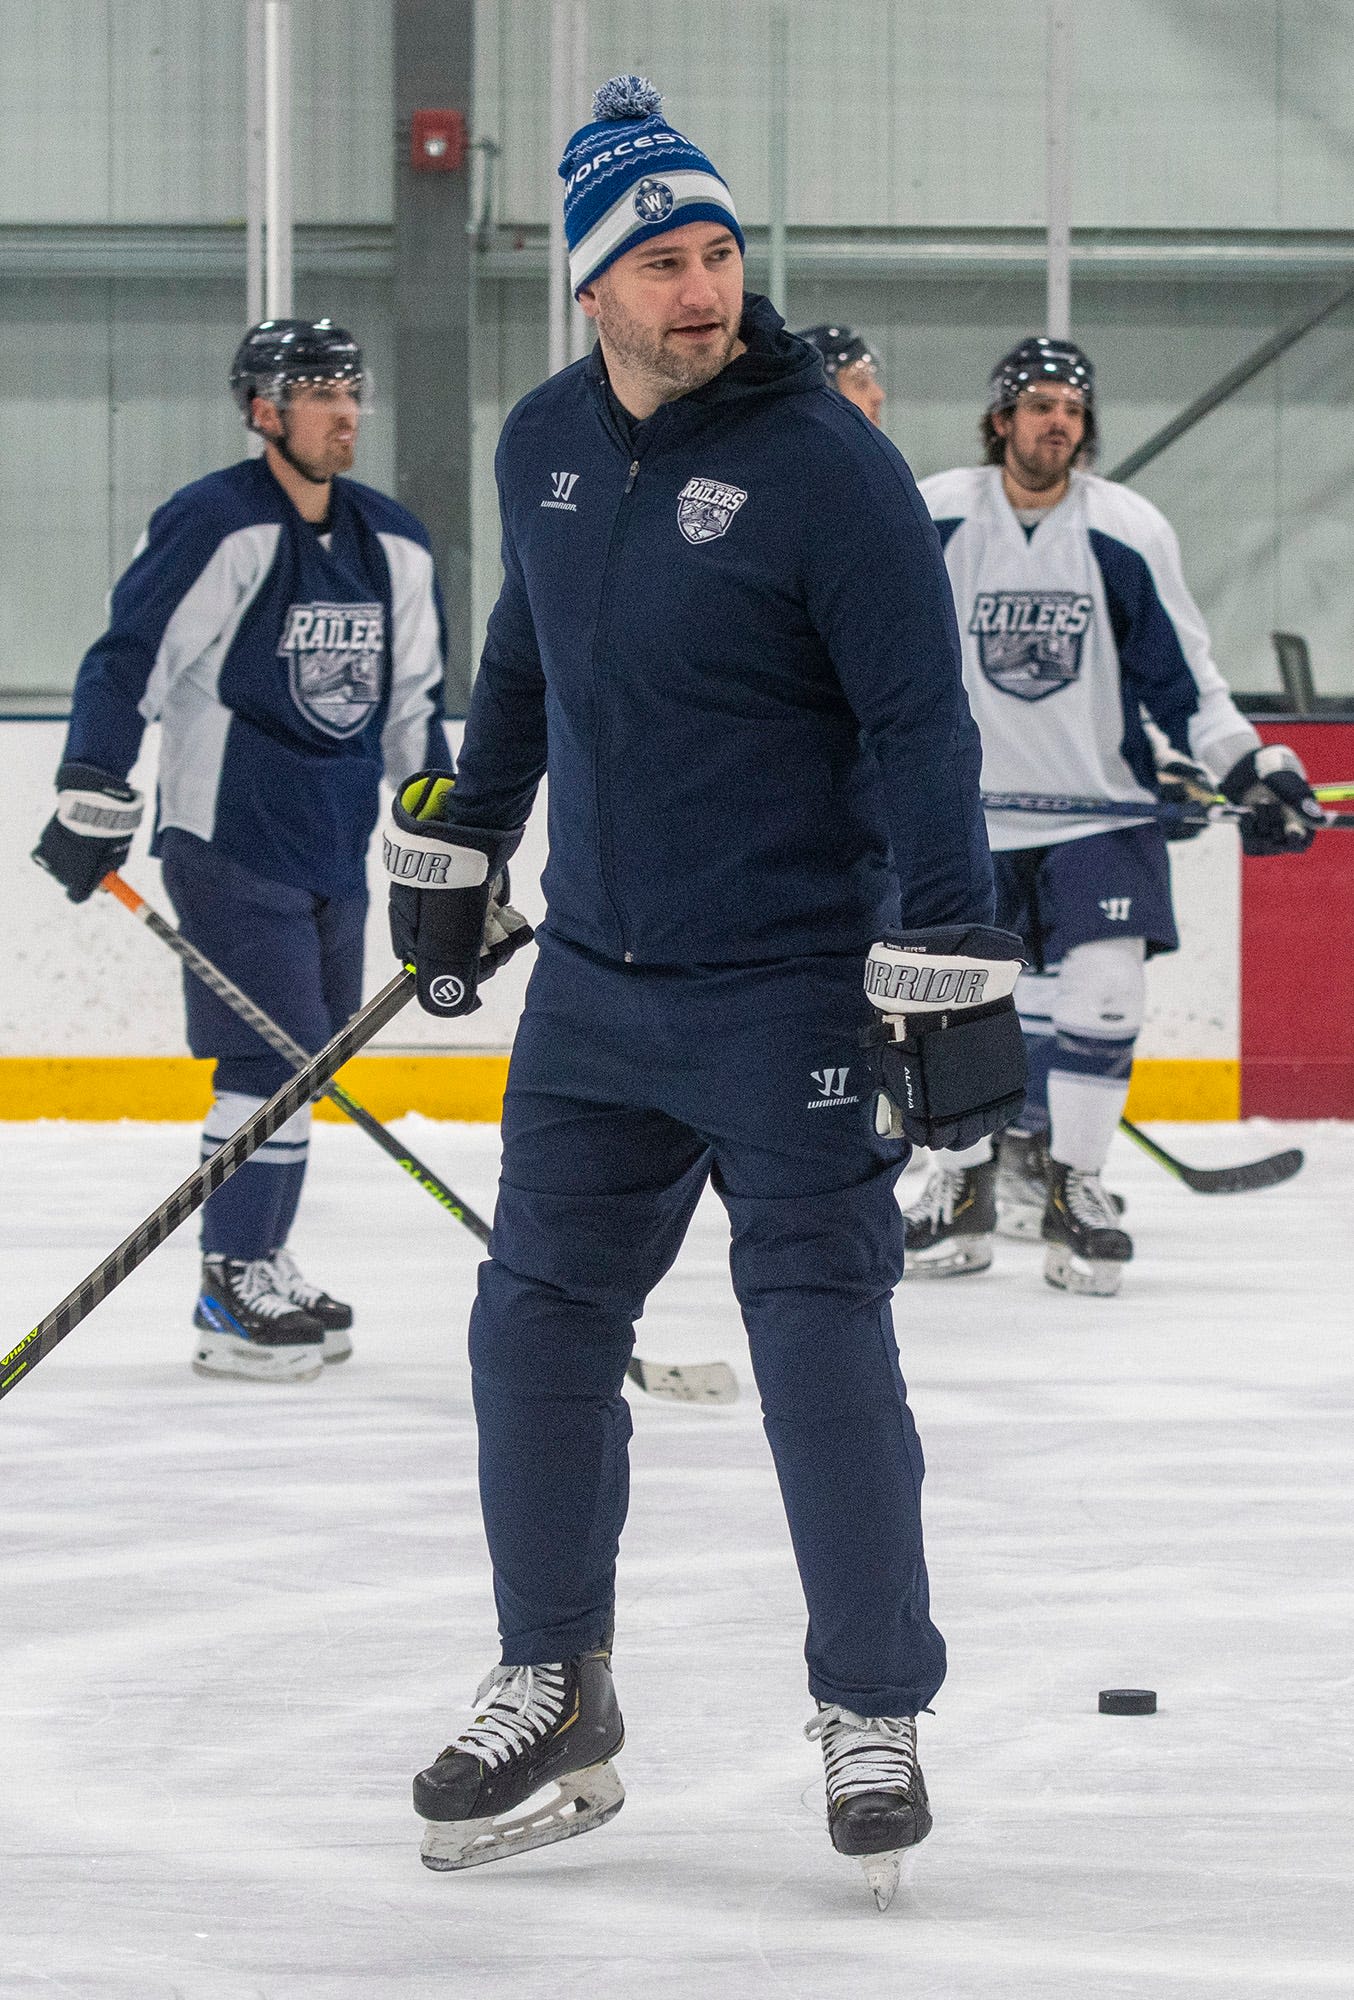 'I will be forever grateful': Railers and head coach mutually agree to part ways